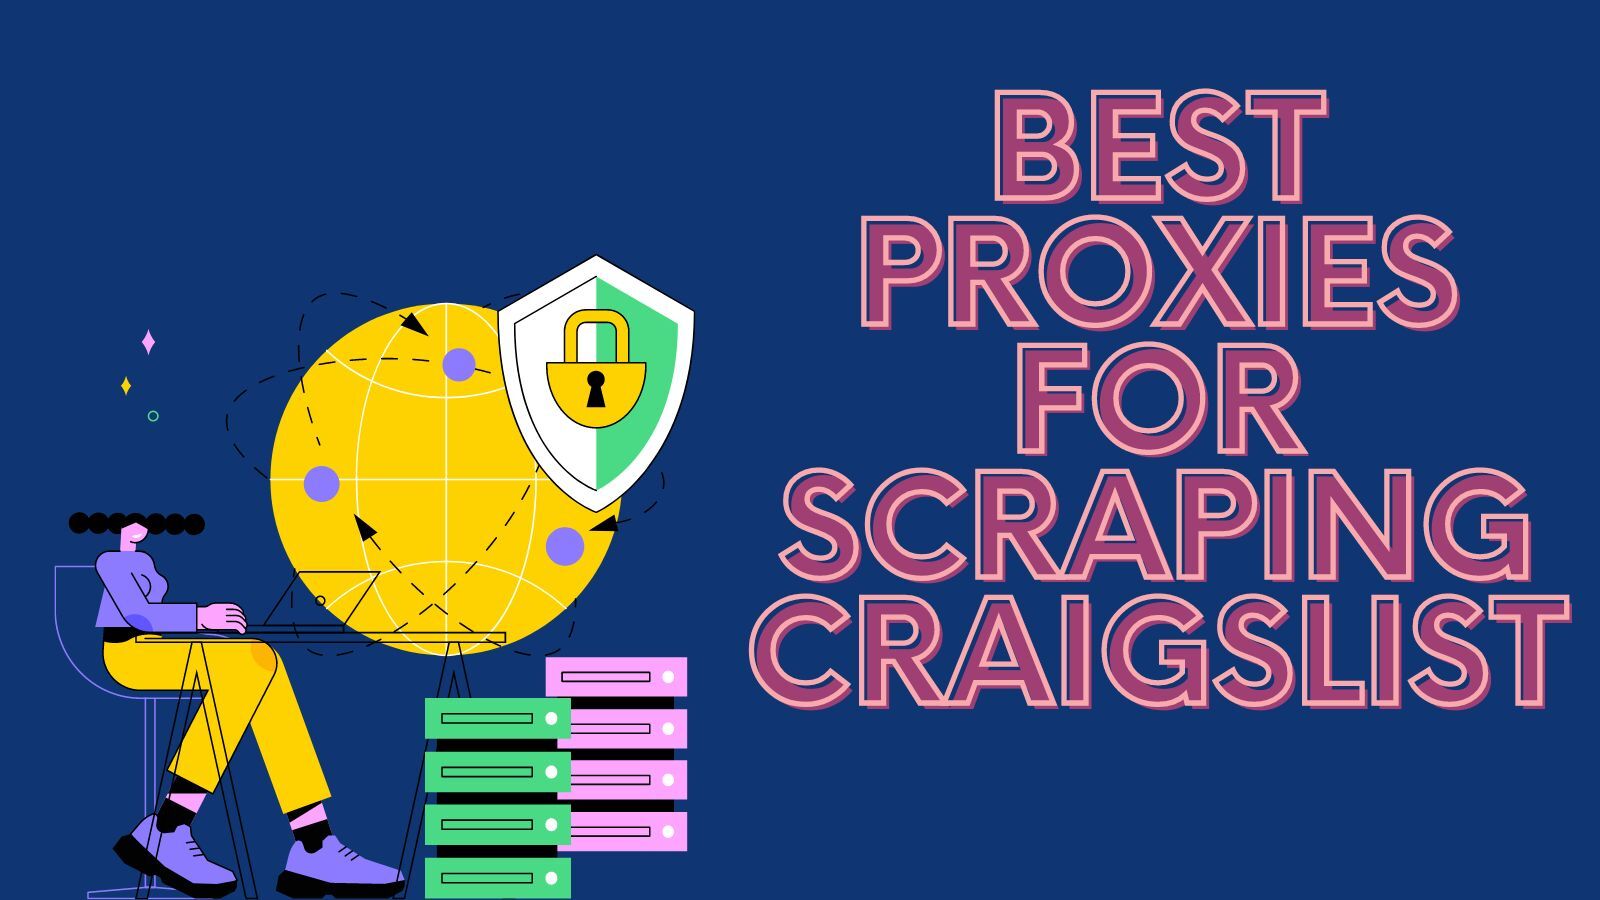 Top 10 Proxy Services for Craigslist Scraping (2023 Edition)